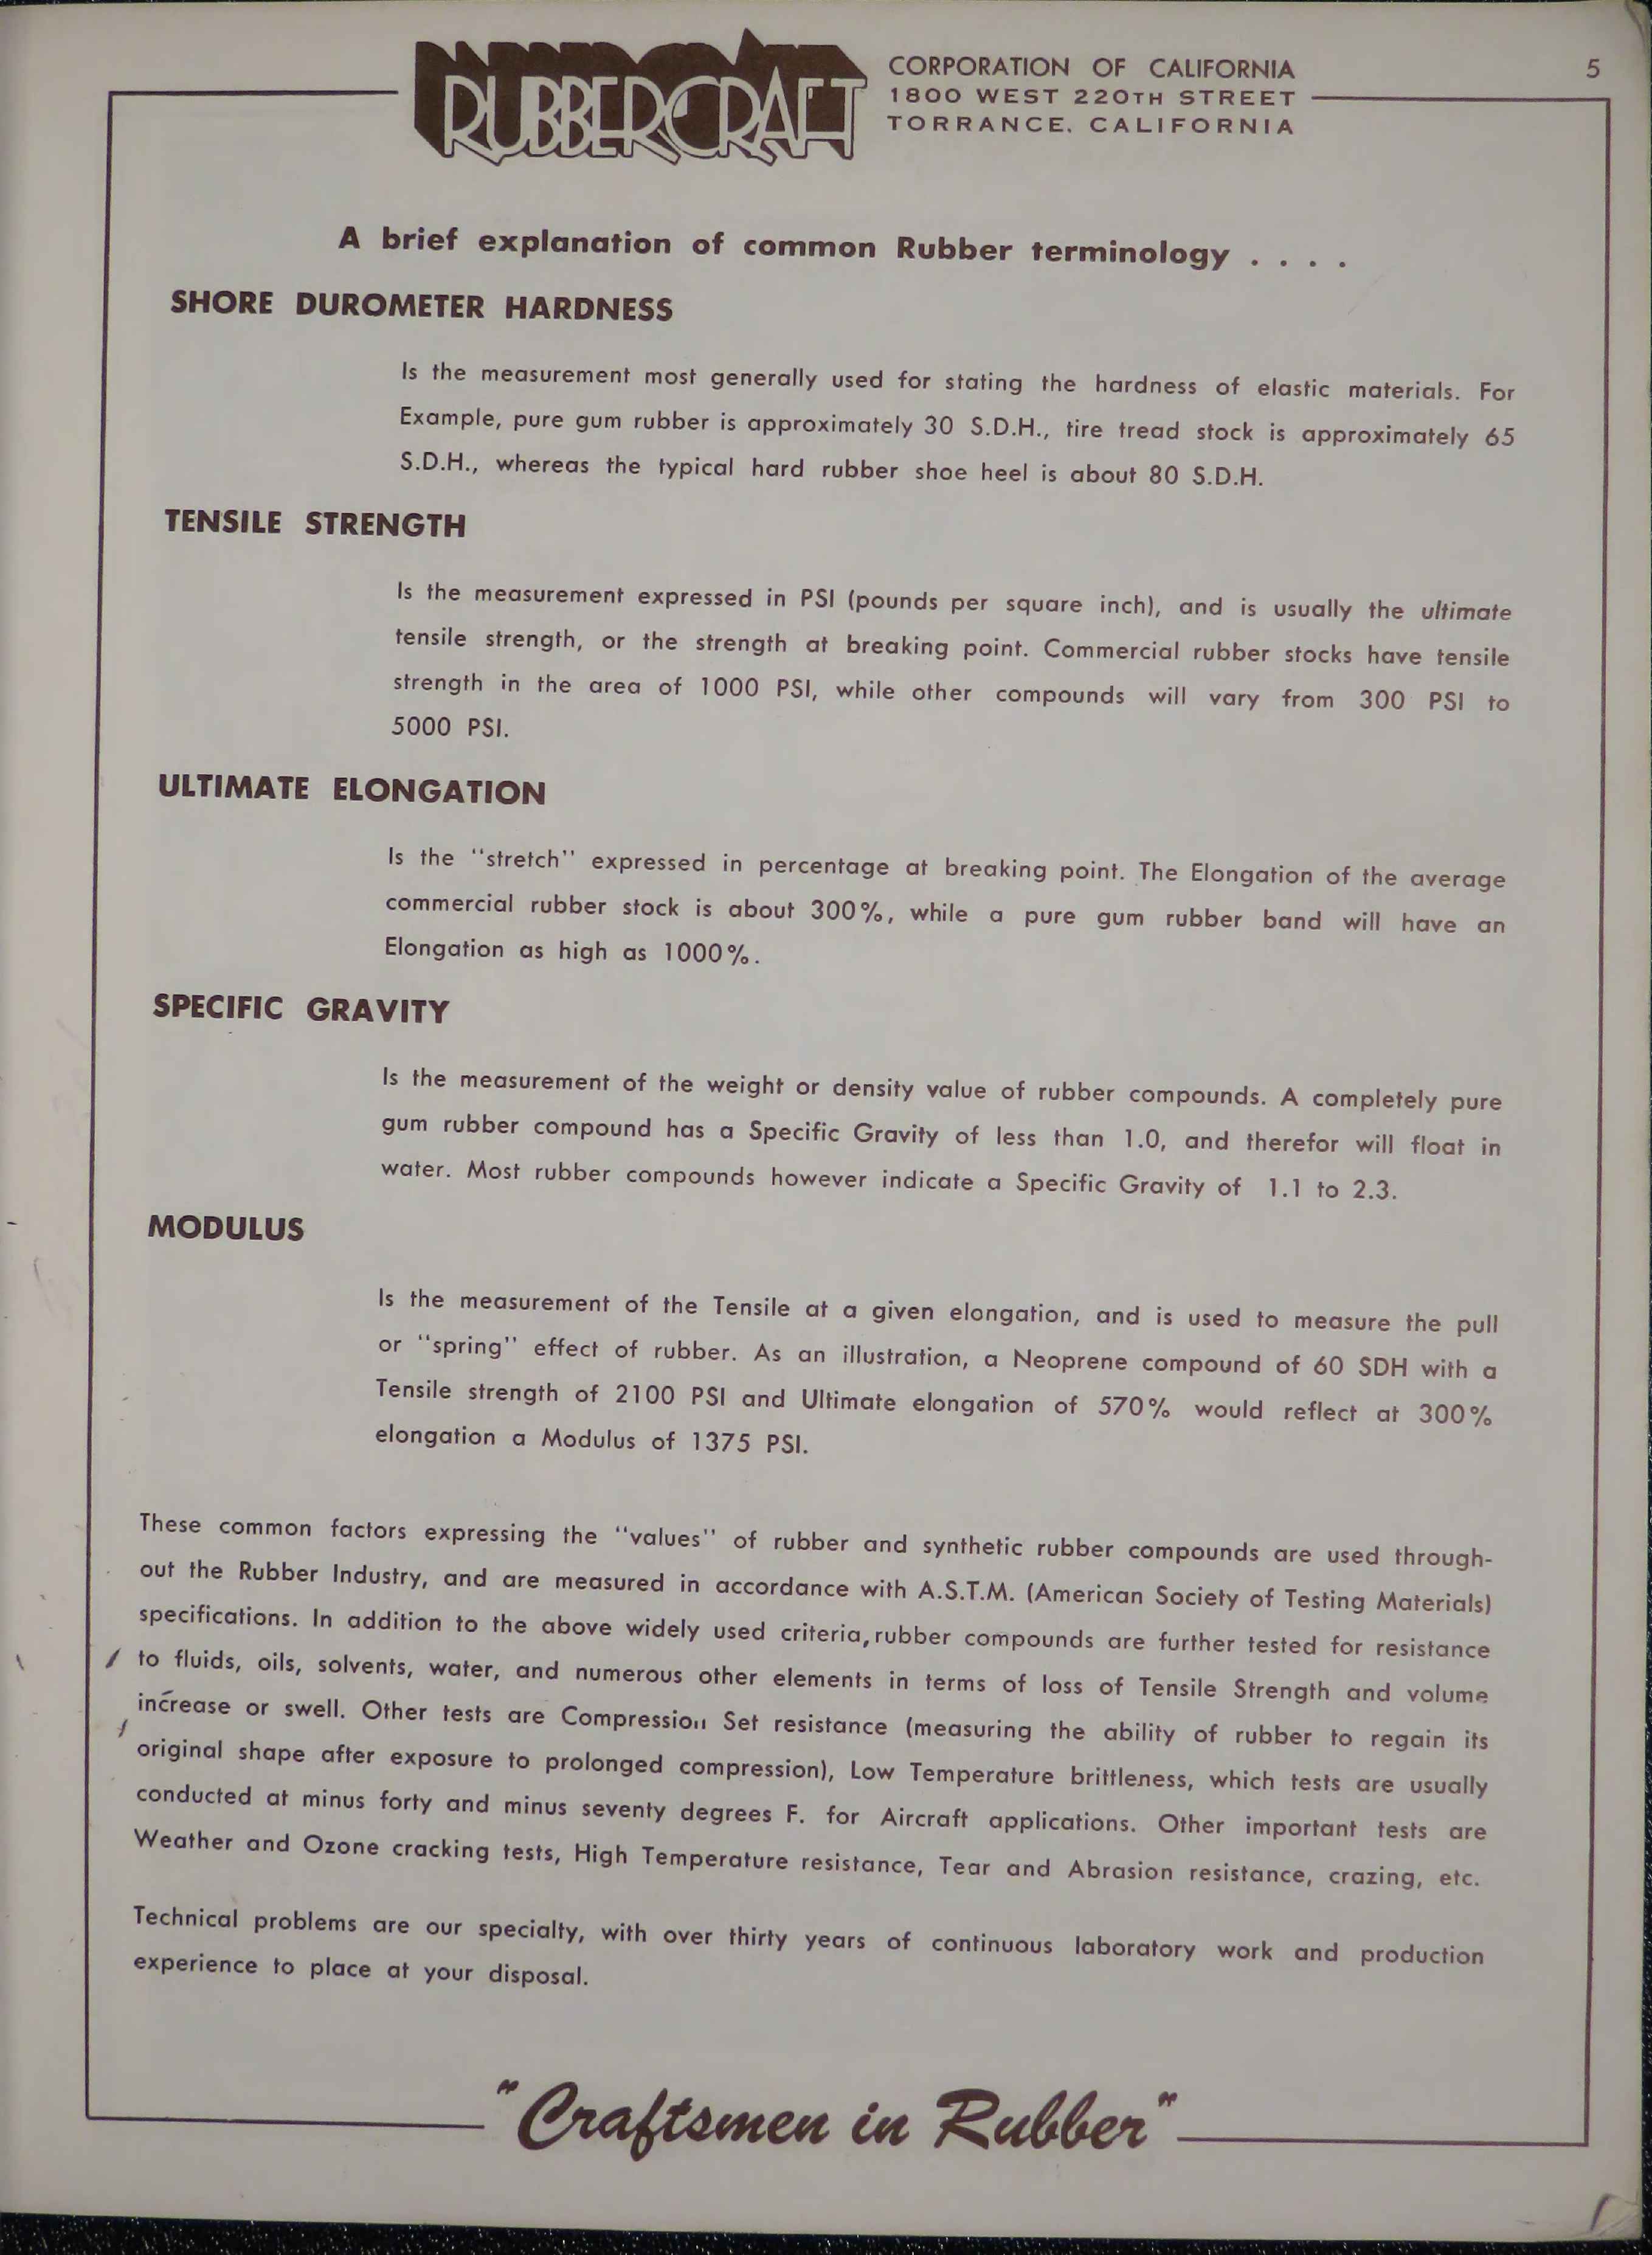 Sample page 7 from AirCorps Library document: Craftsmen in Rubber